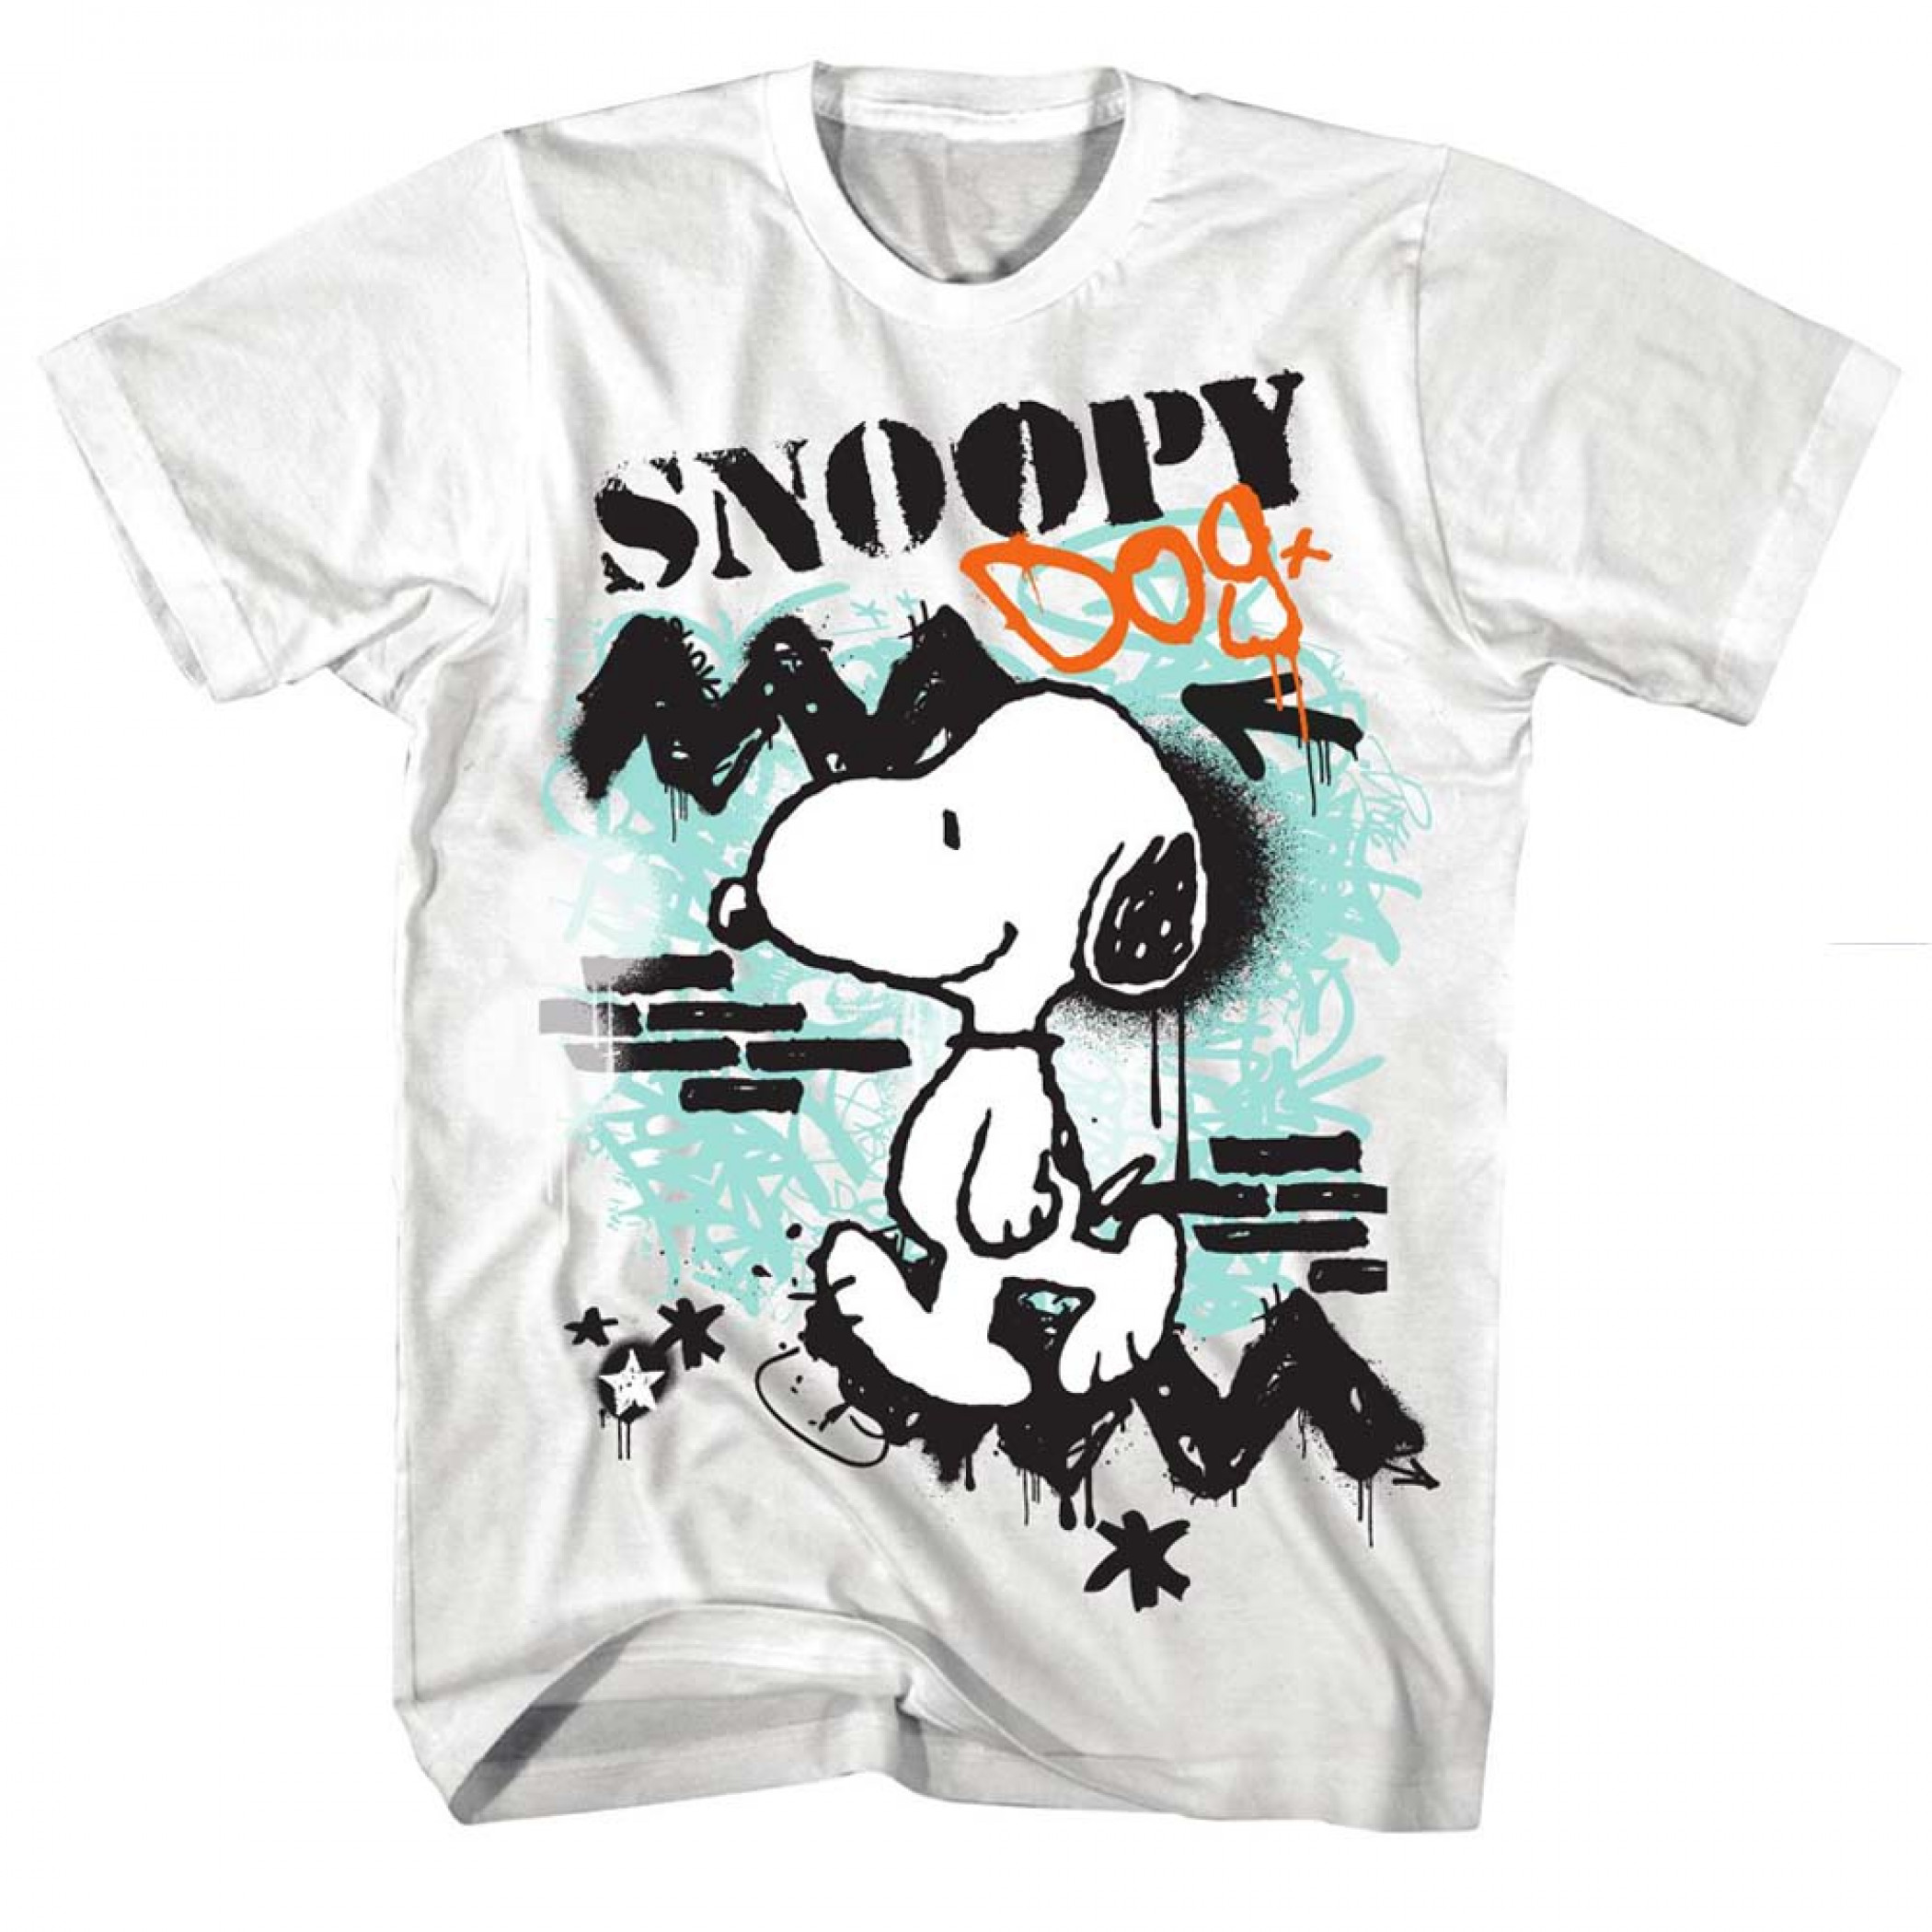 Peanuts Snoopy Dog Doodle Sketch Style T-Shirt